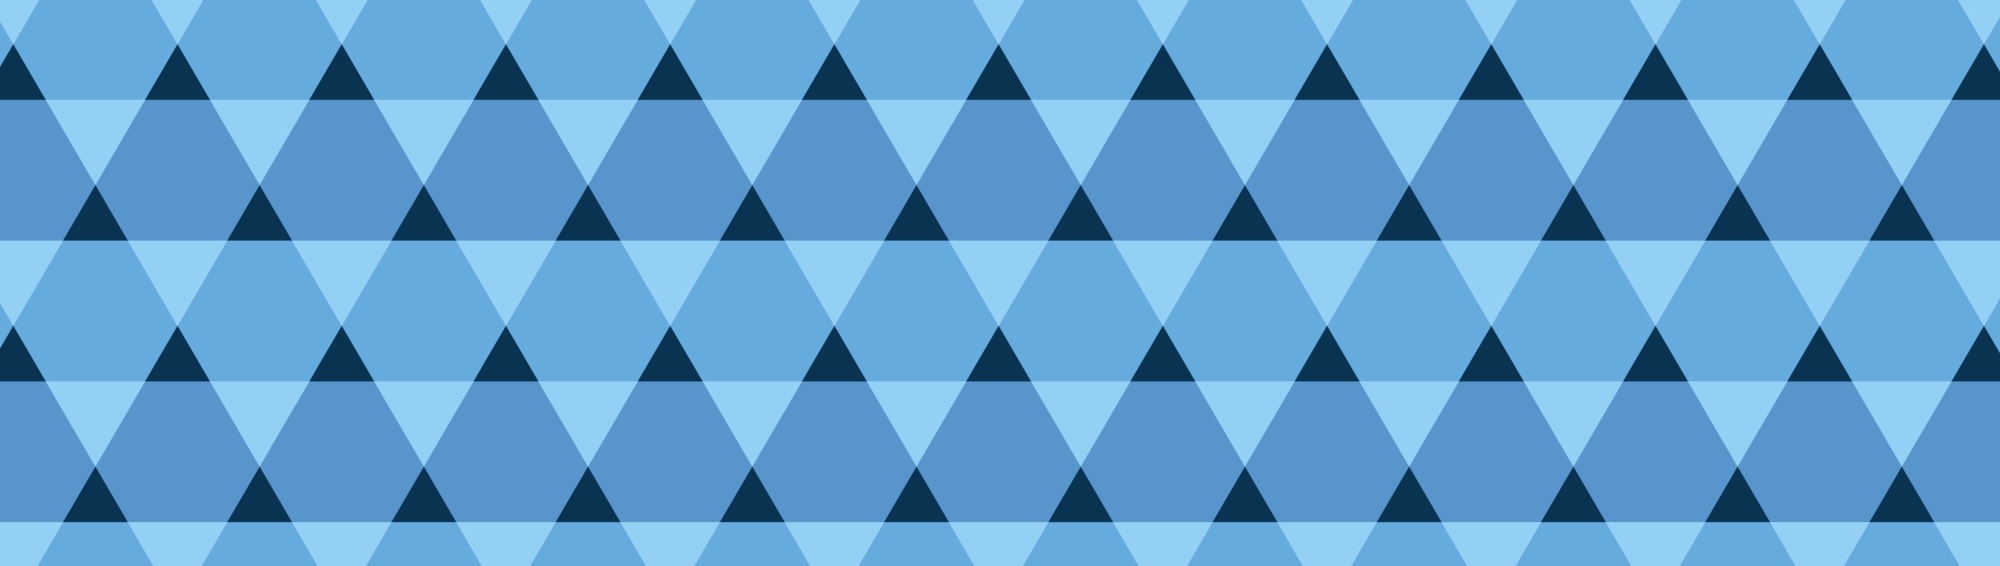 Blue Triangles Pattern